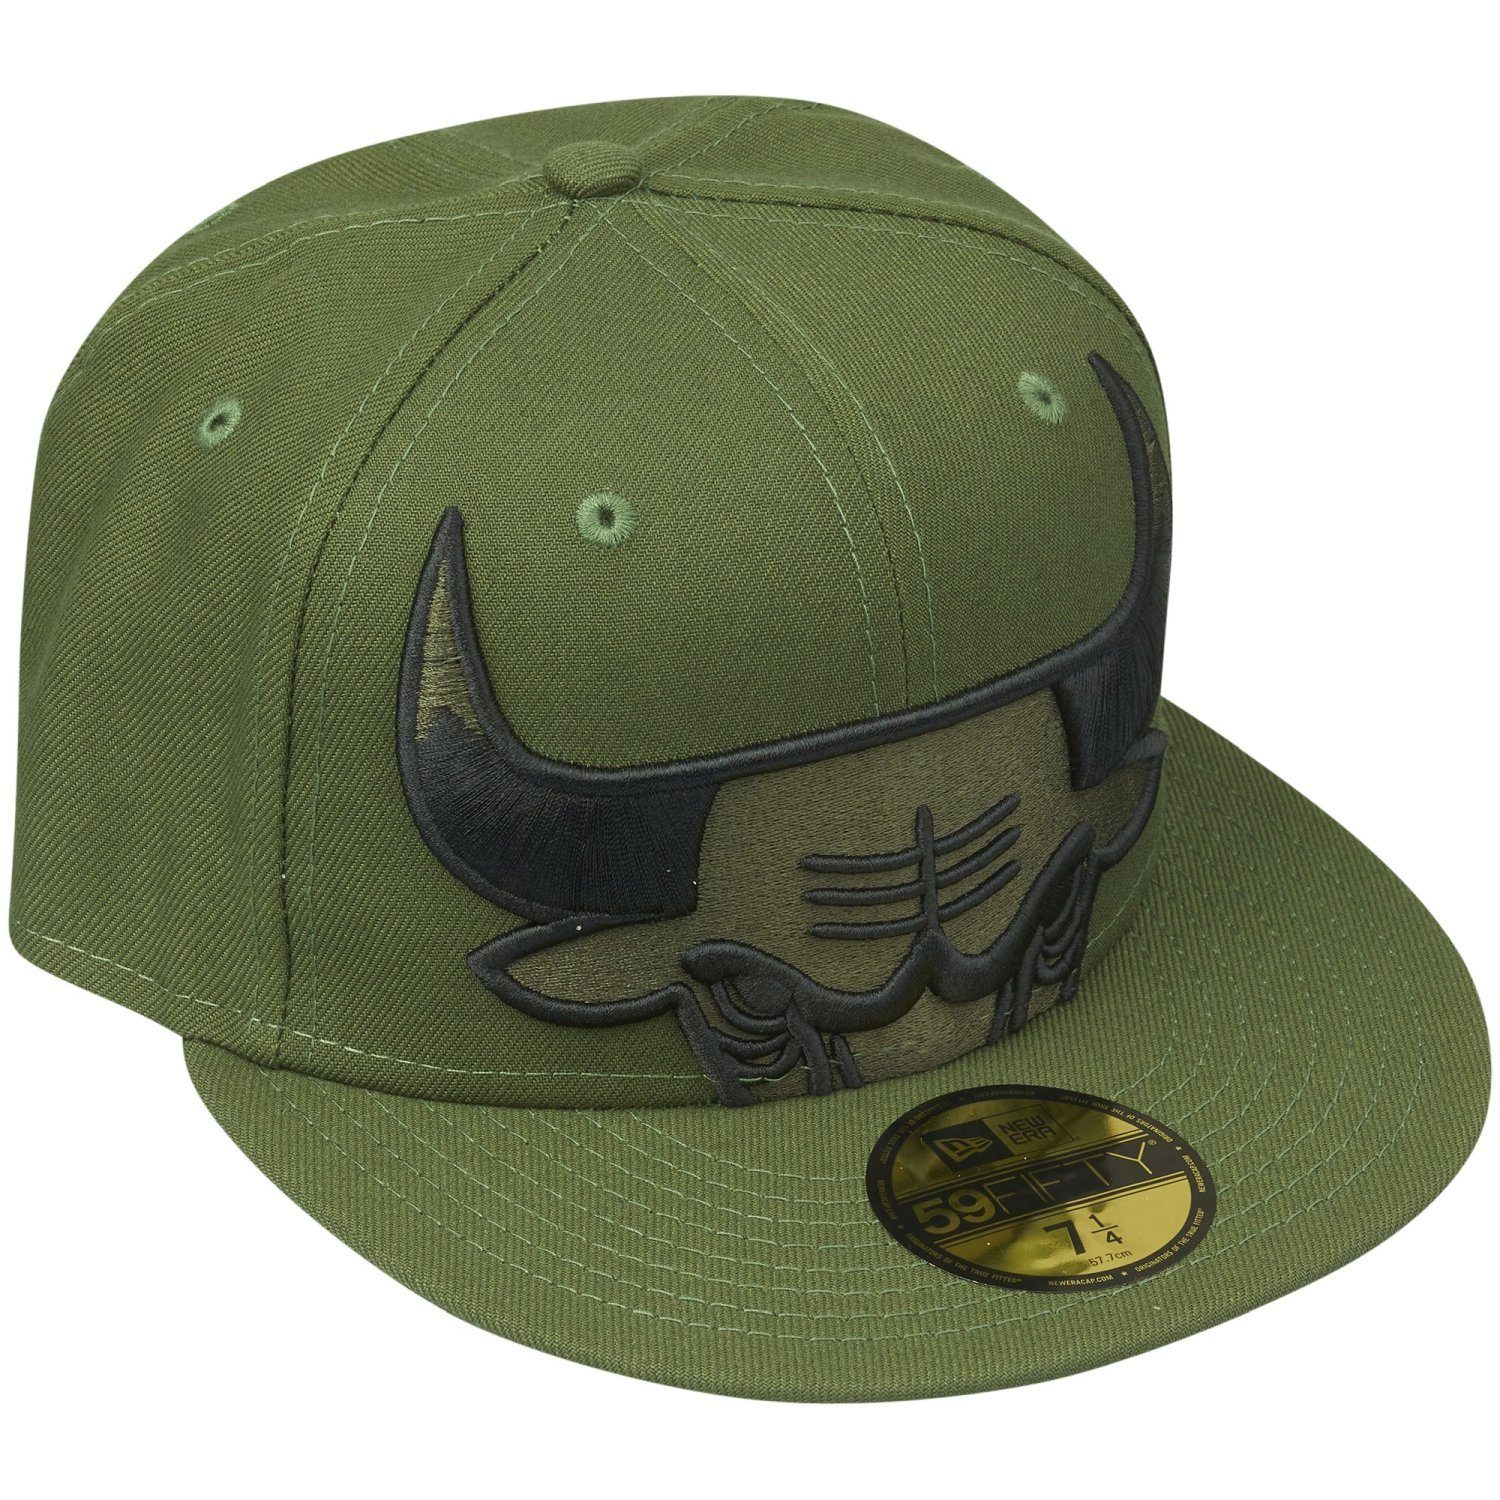 New Era Fitted Cap olive Chicago 59Fifty Bulls